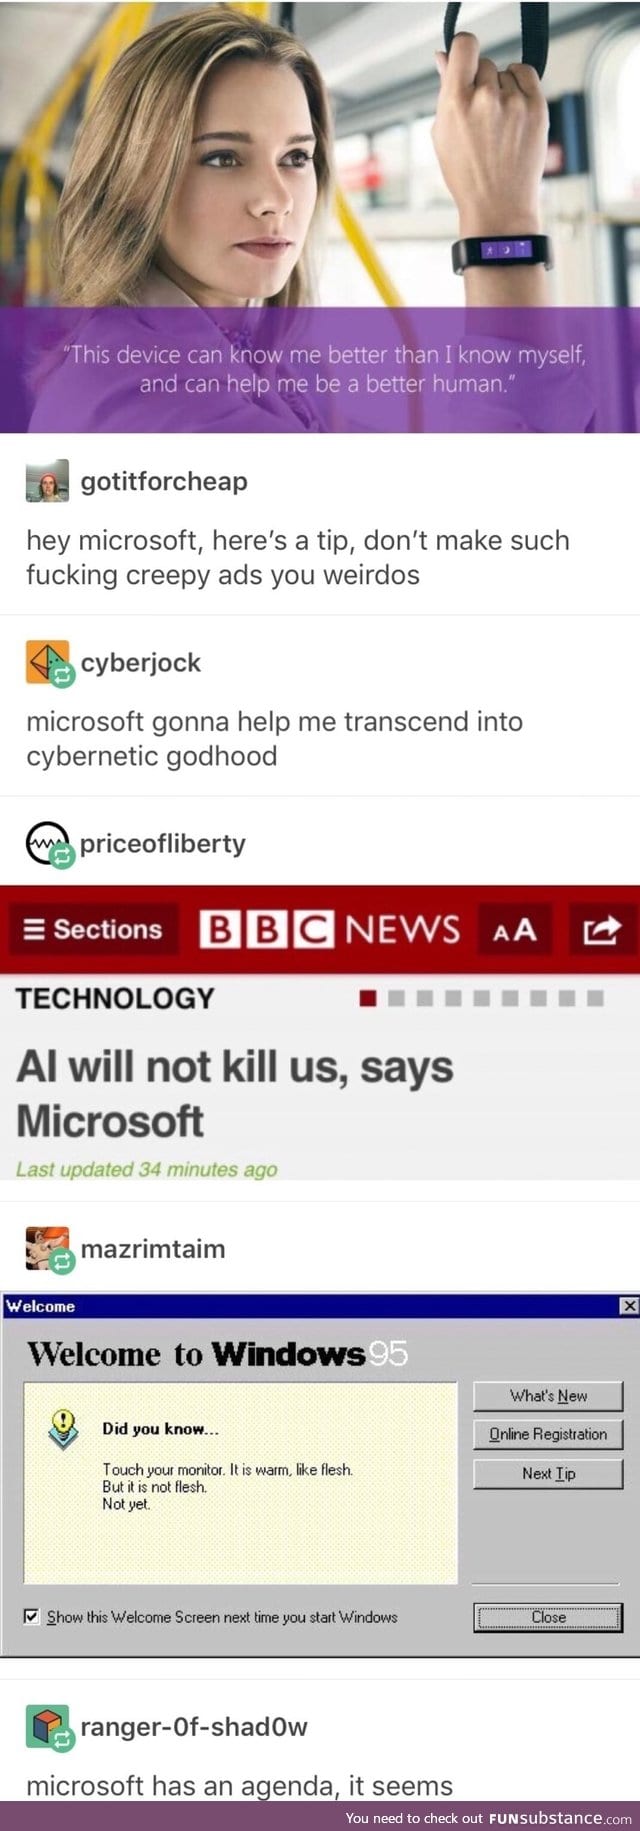 Microsoft is up to something